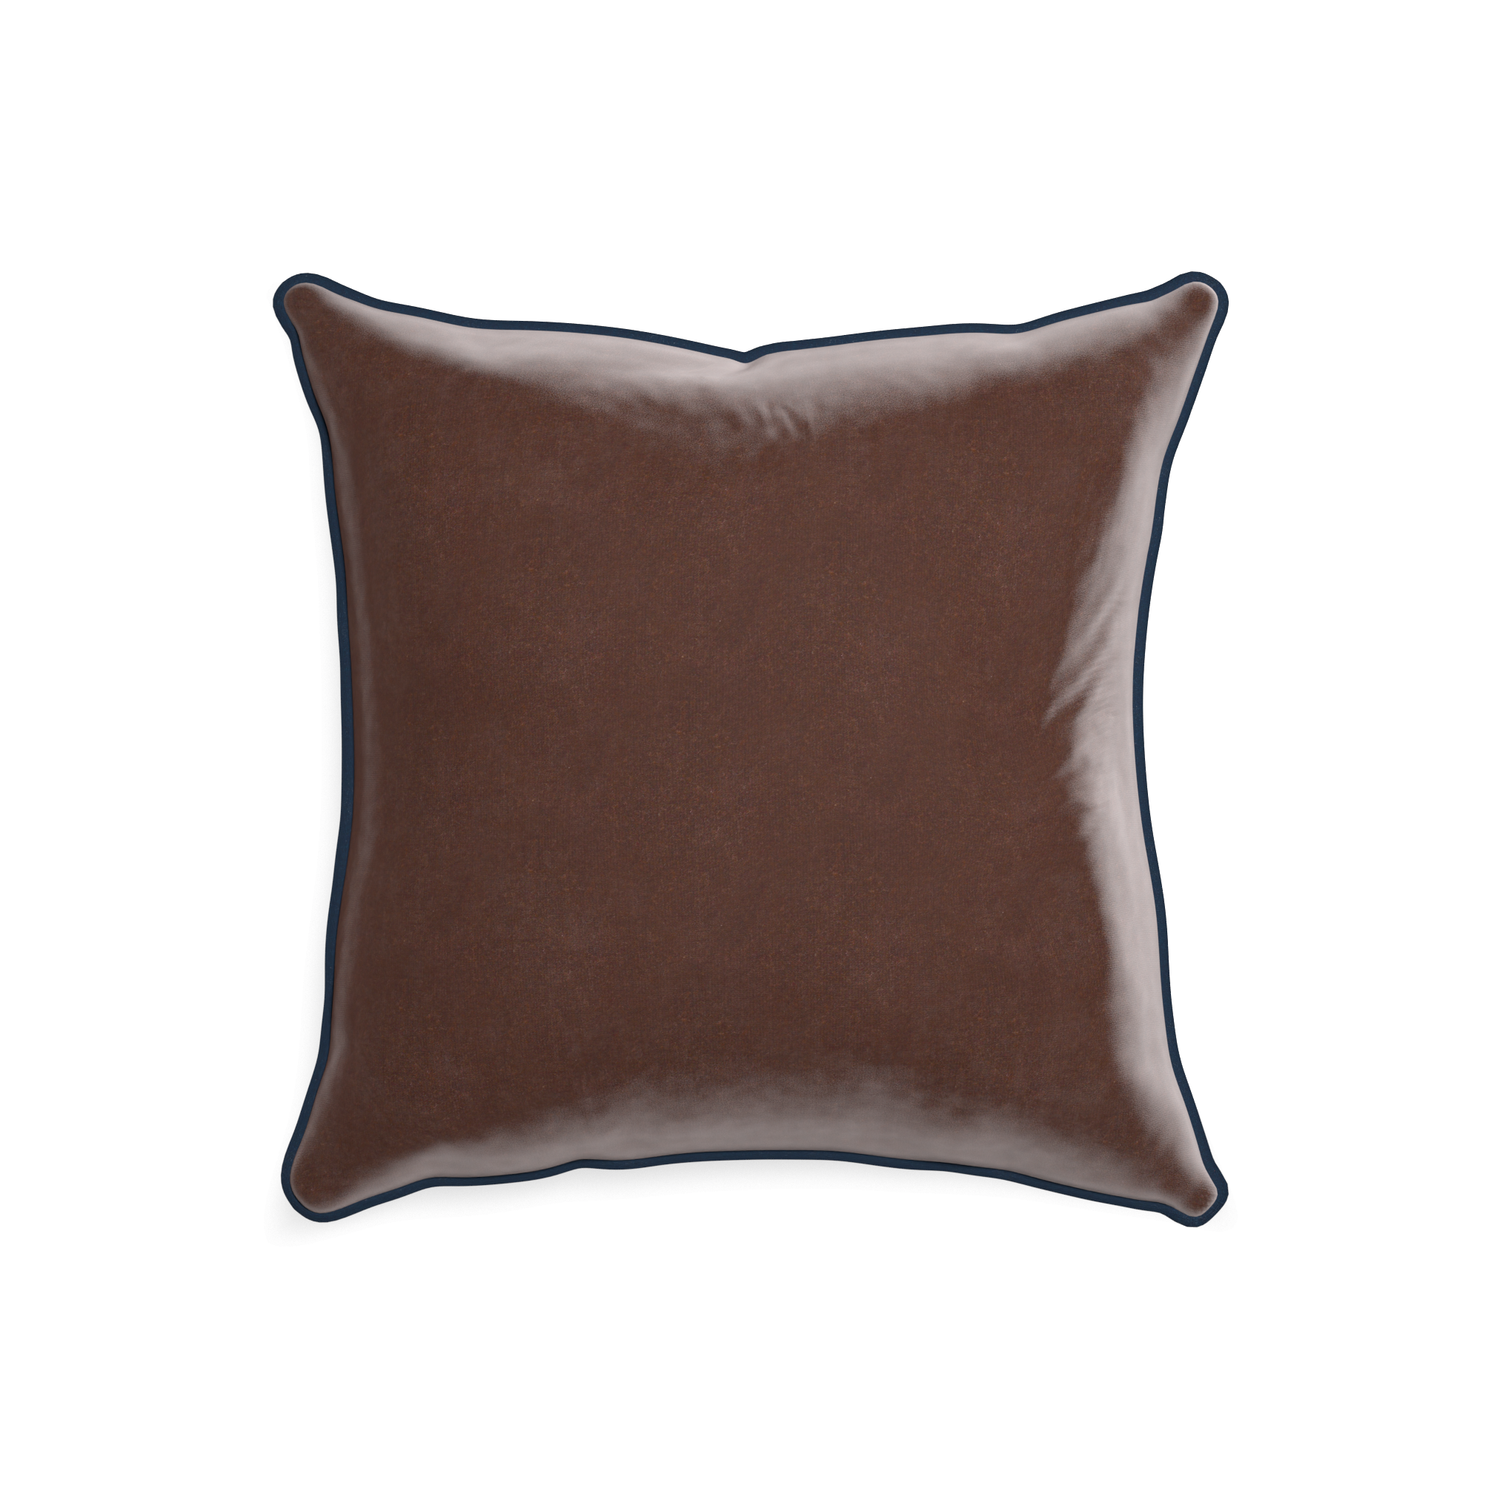 20-square walnut velvet custom brownpillow with c piping on white background